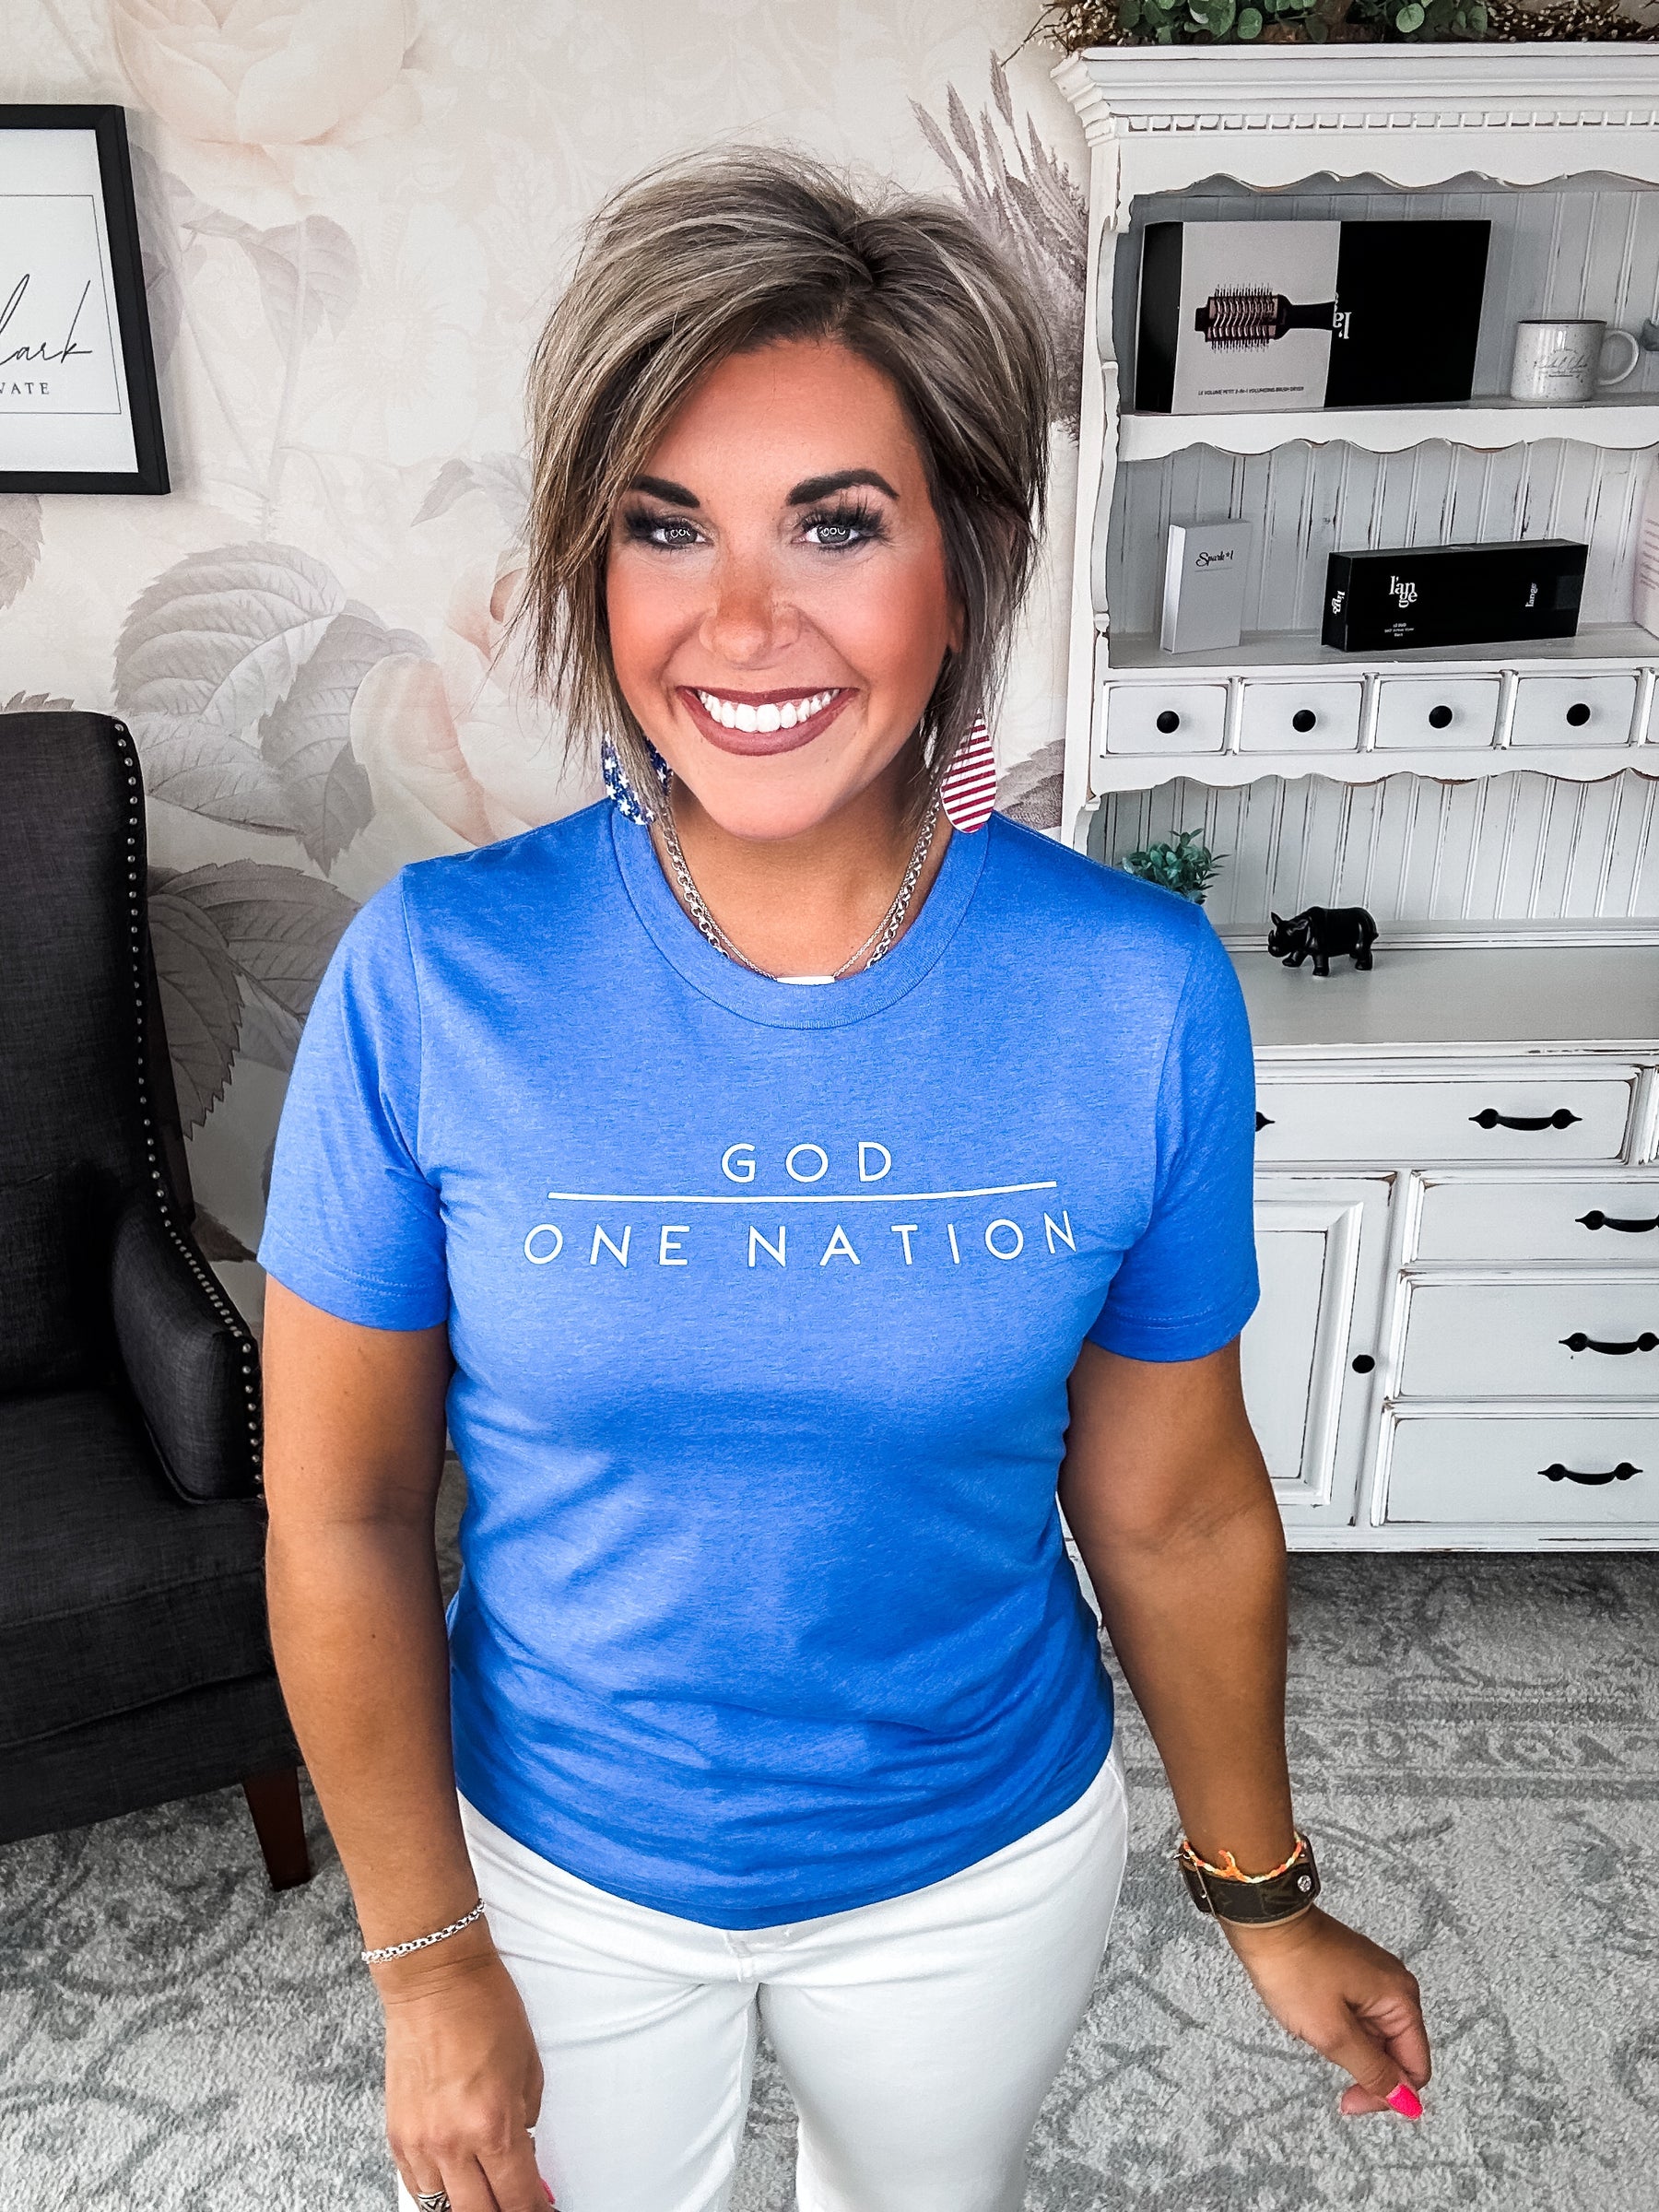 One Nation Under God Graphic Tee